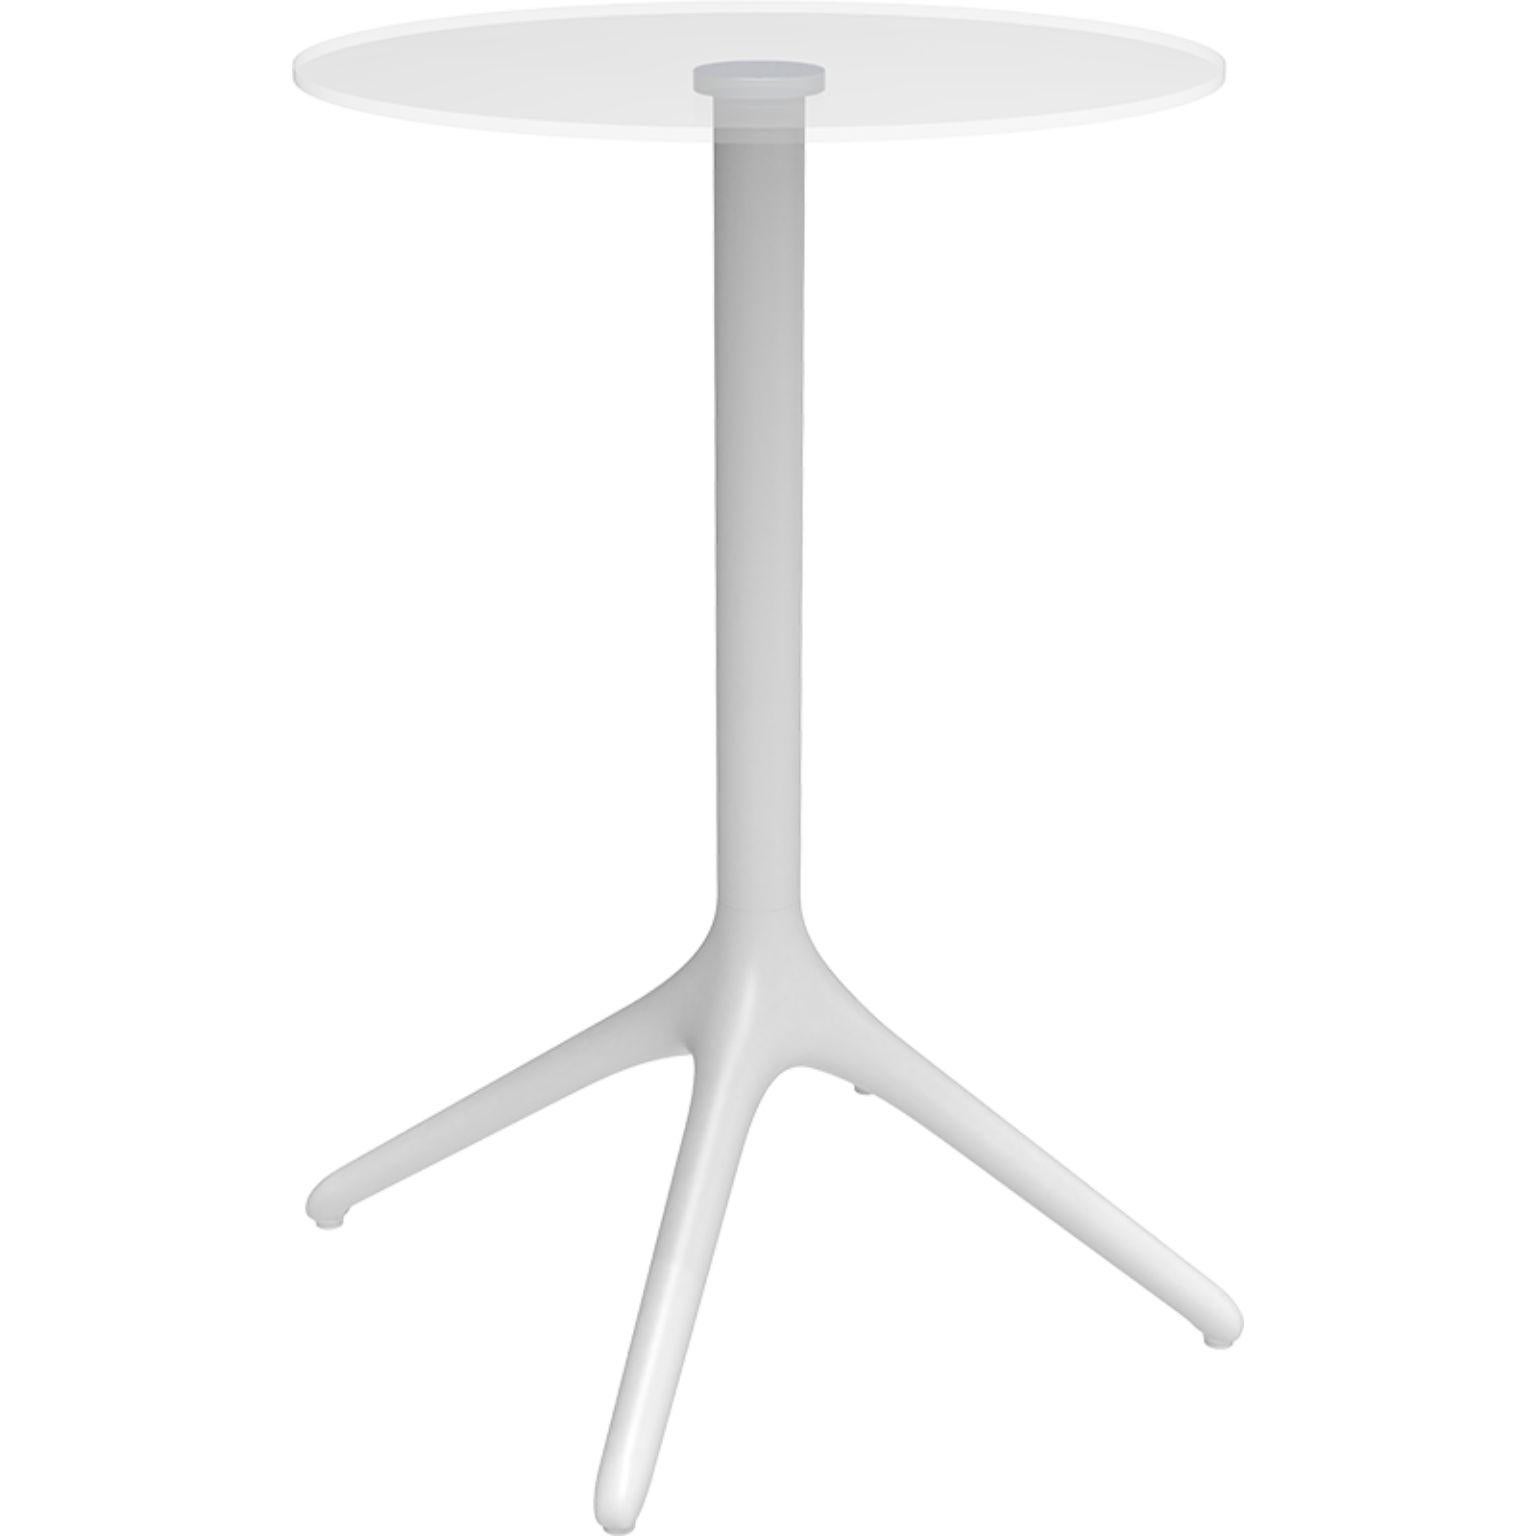 Aluminum Uni Burgundy Table XL 105 by Mowee For Sale